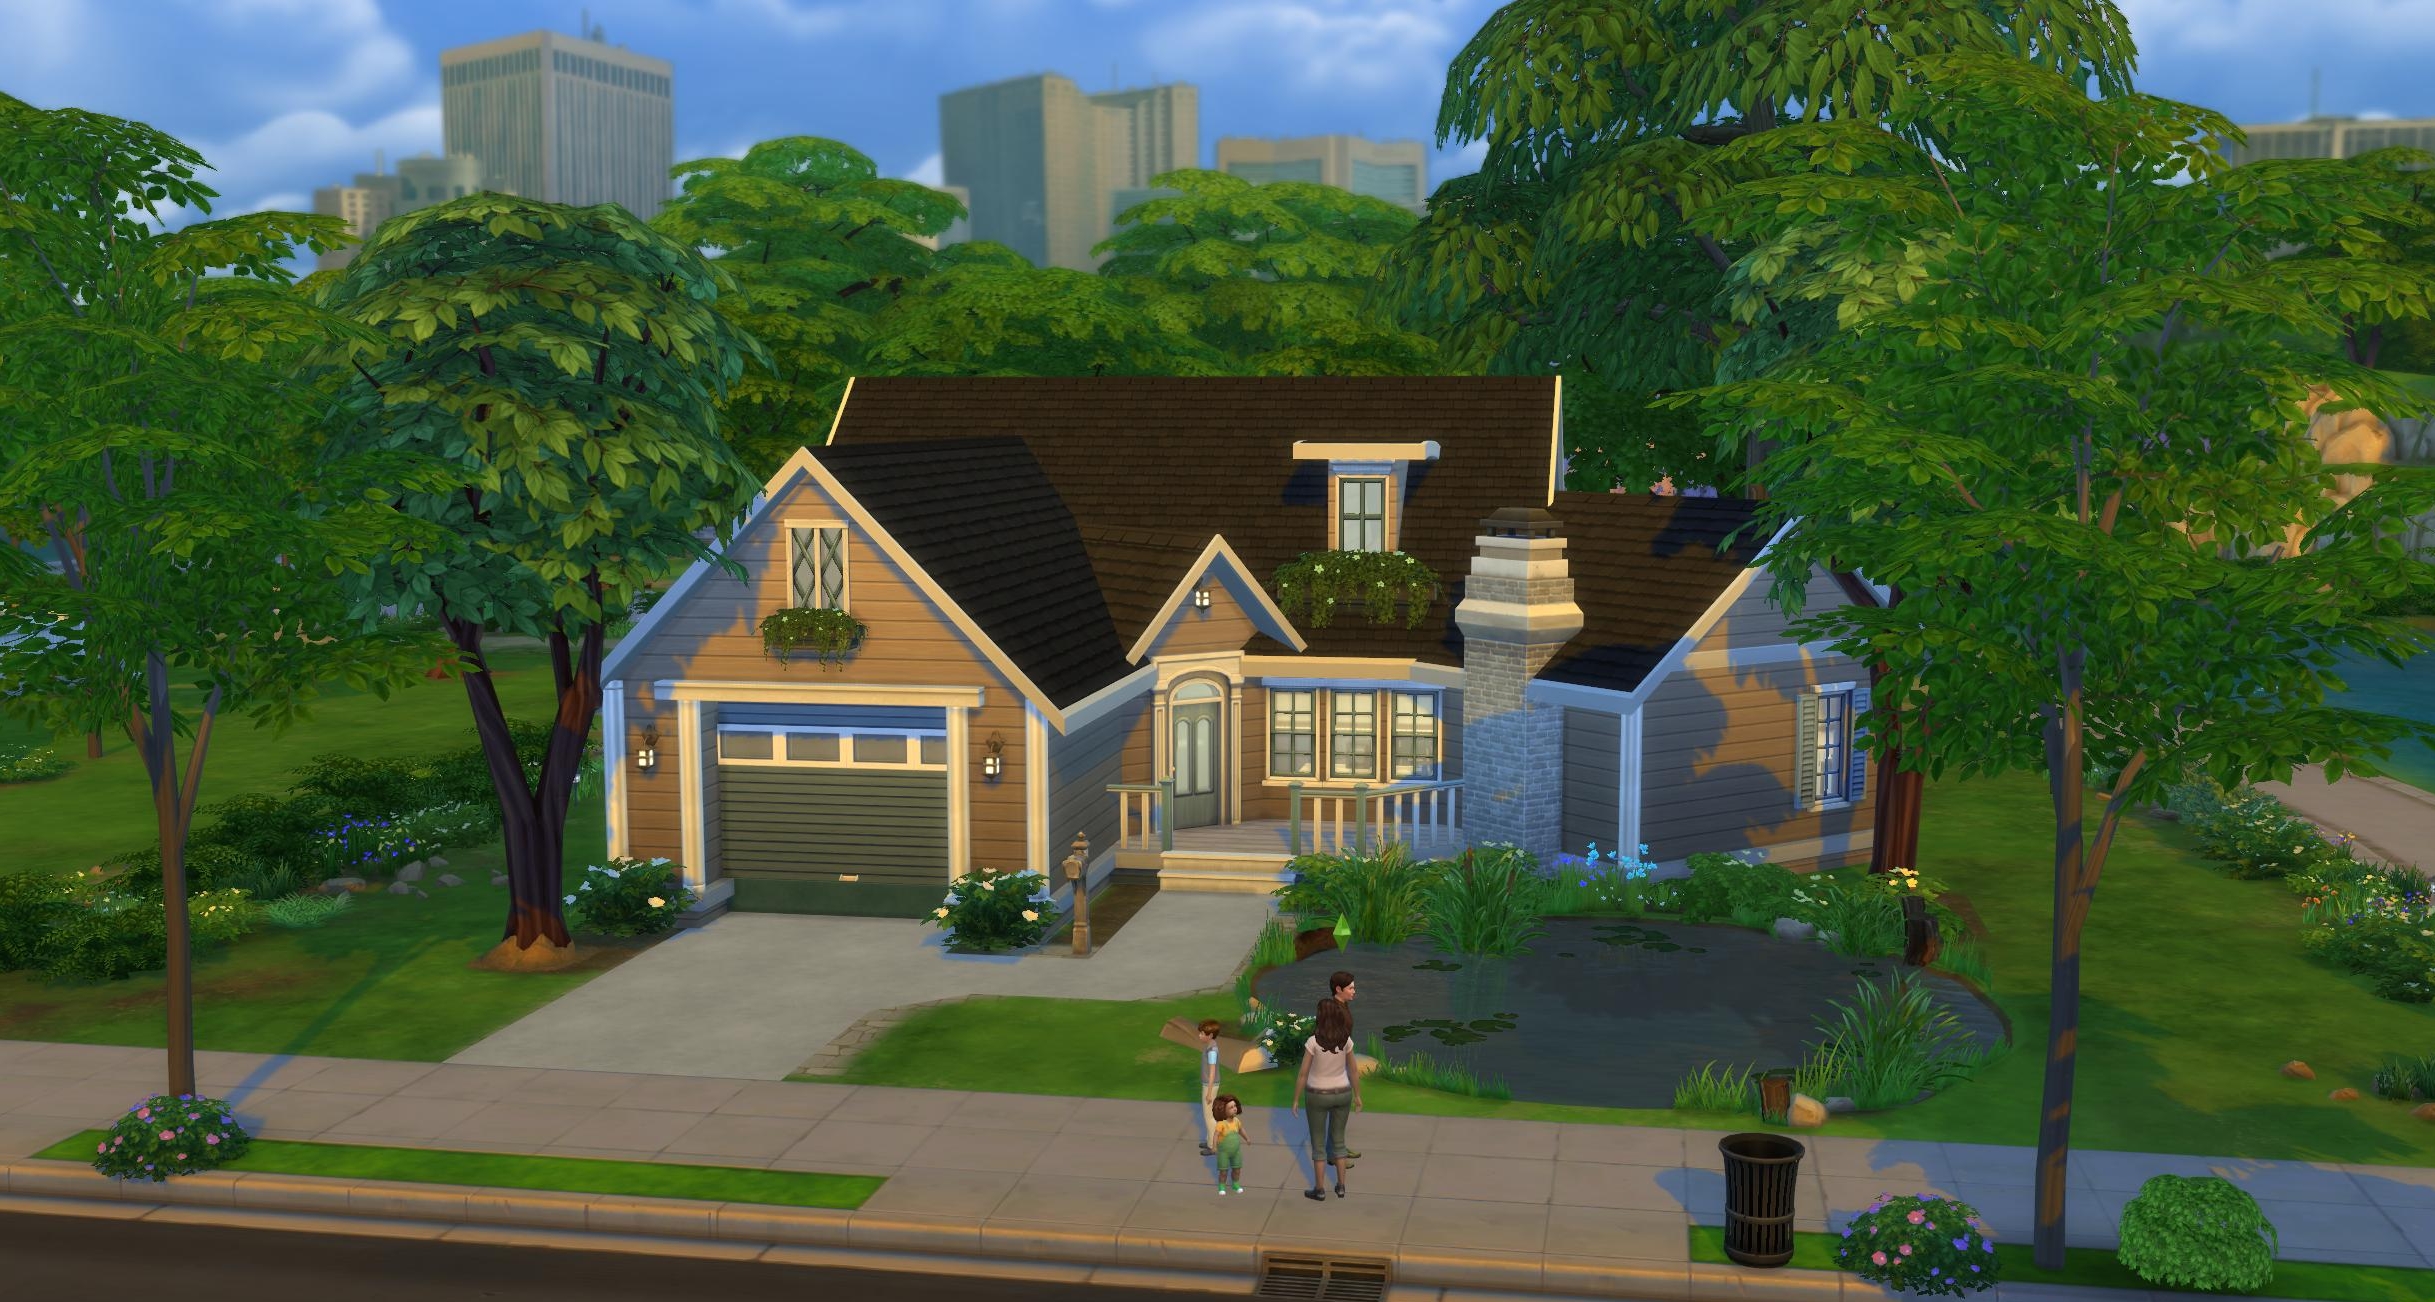 Sims 4 House Building Guide